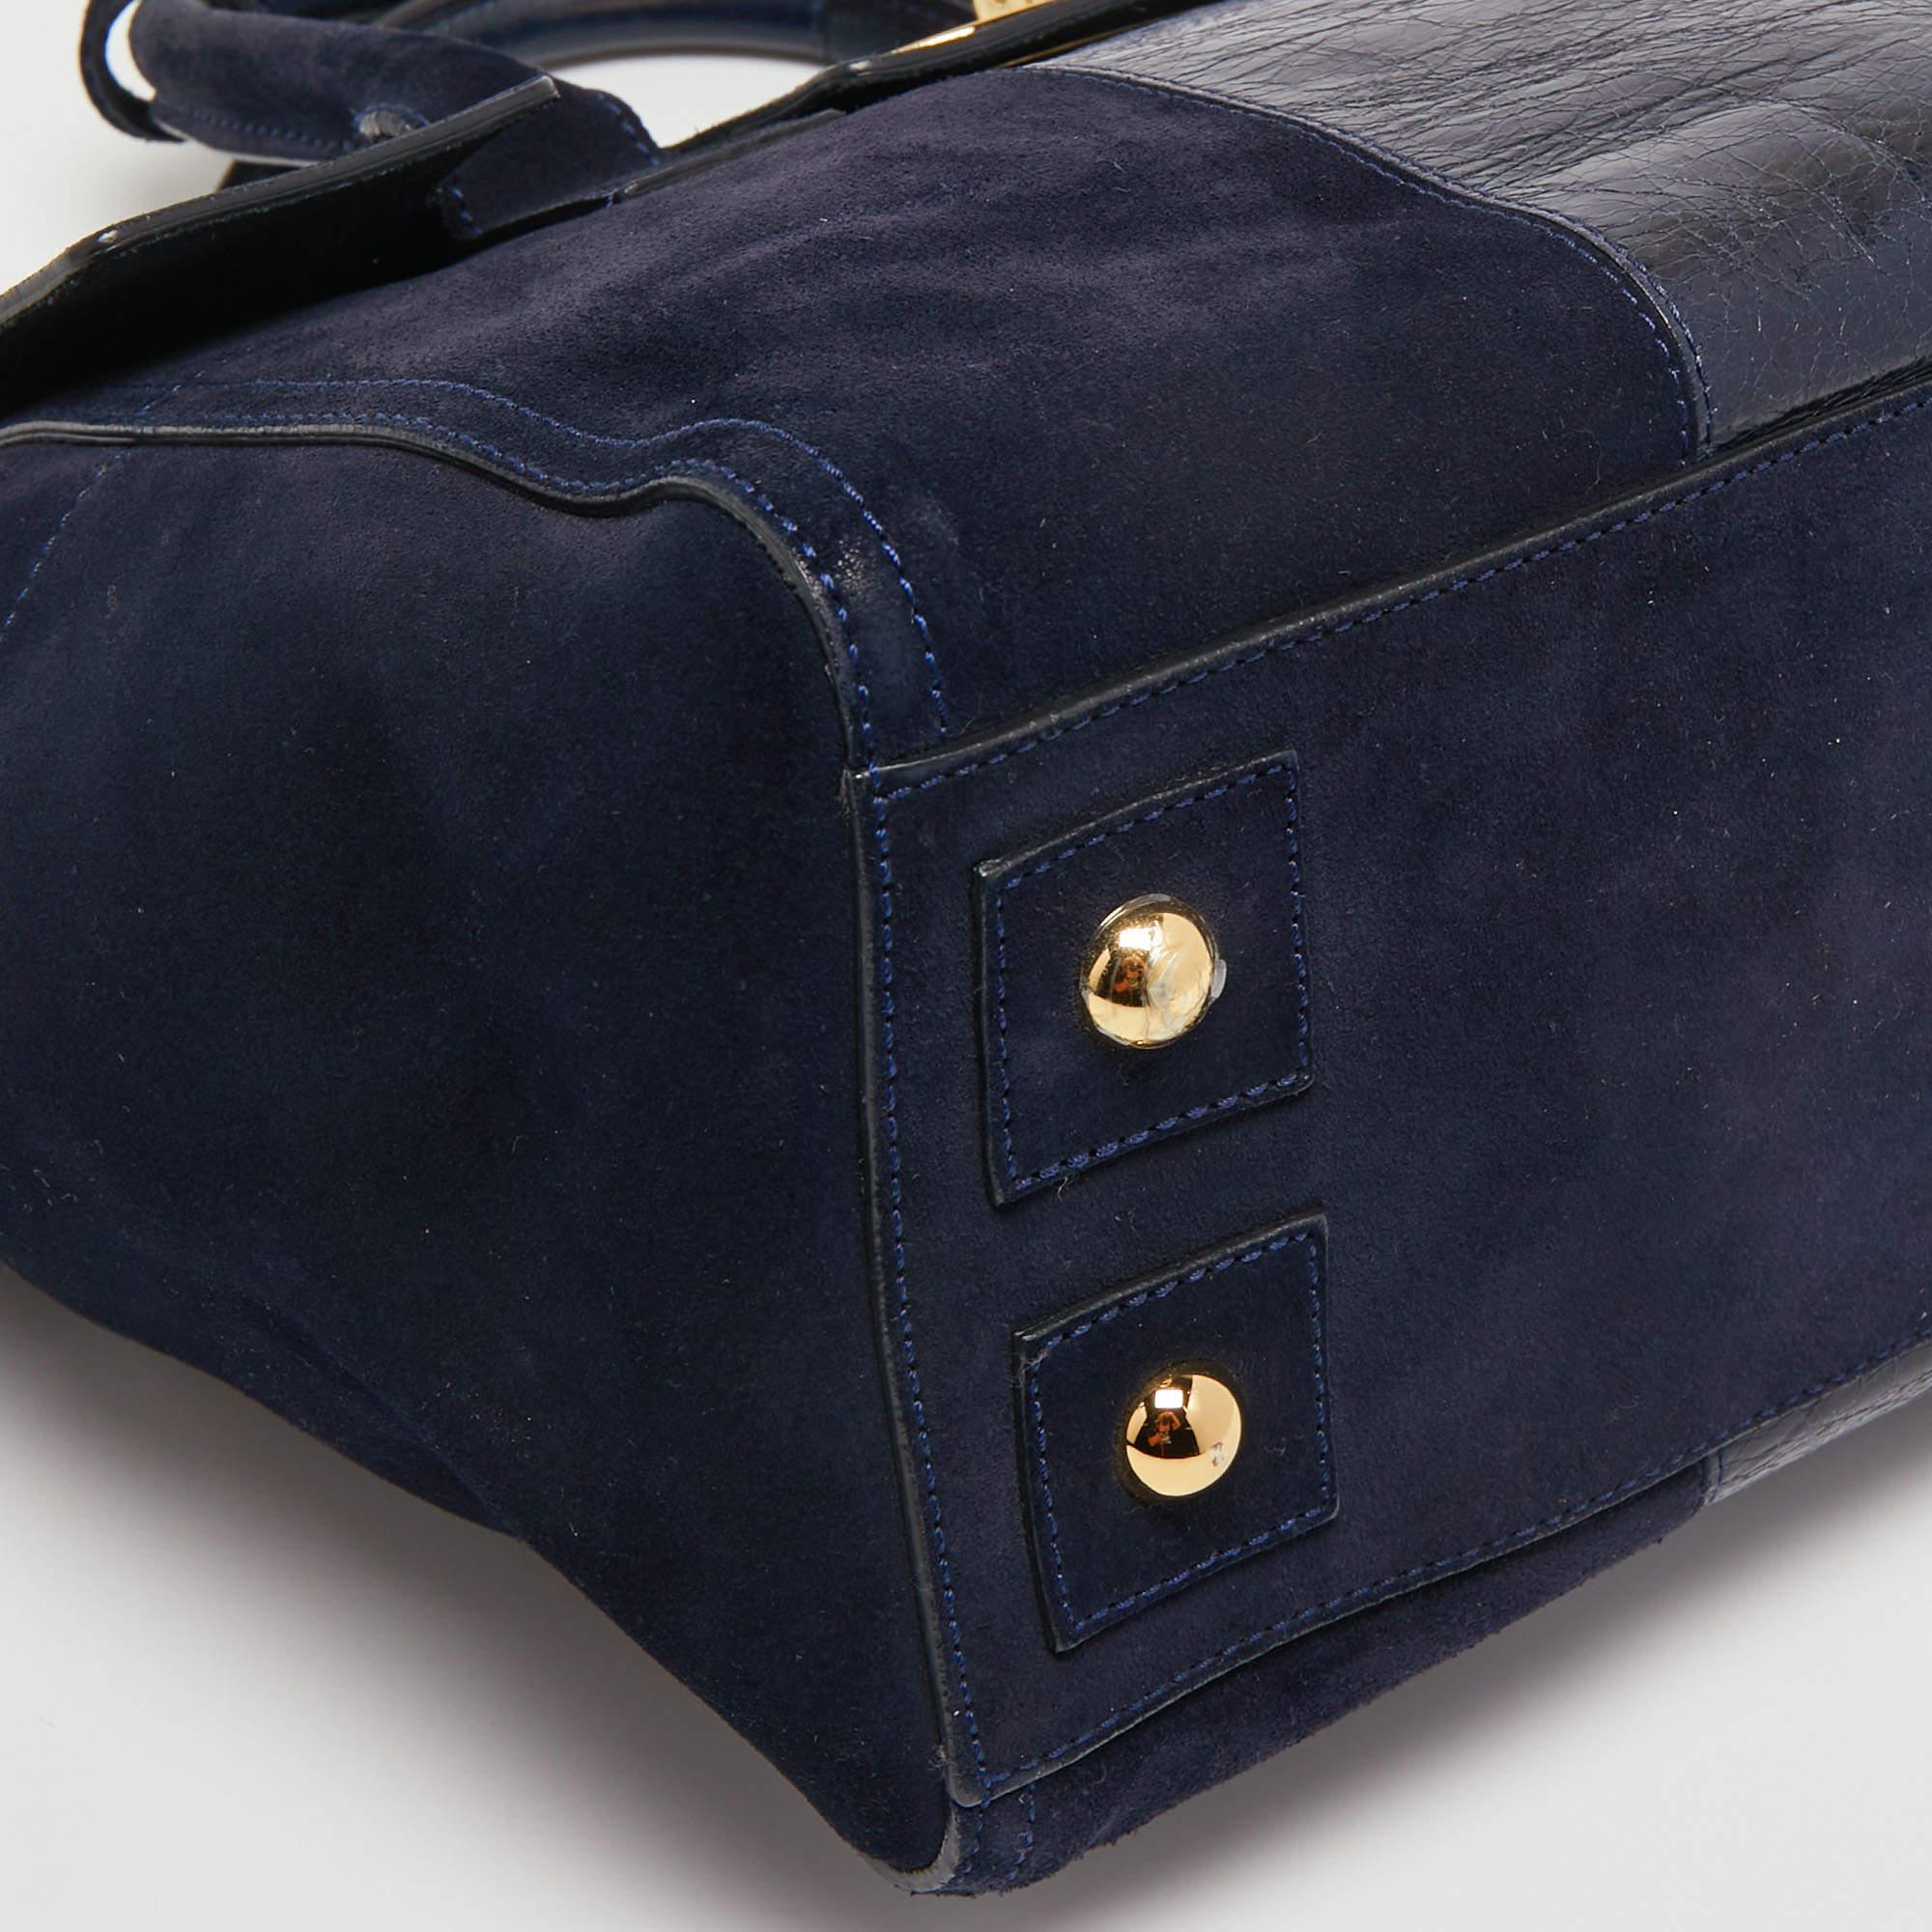 Mulberry Navy Blue Suede and Leather Bayswater Satchel 1